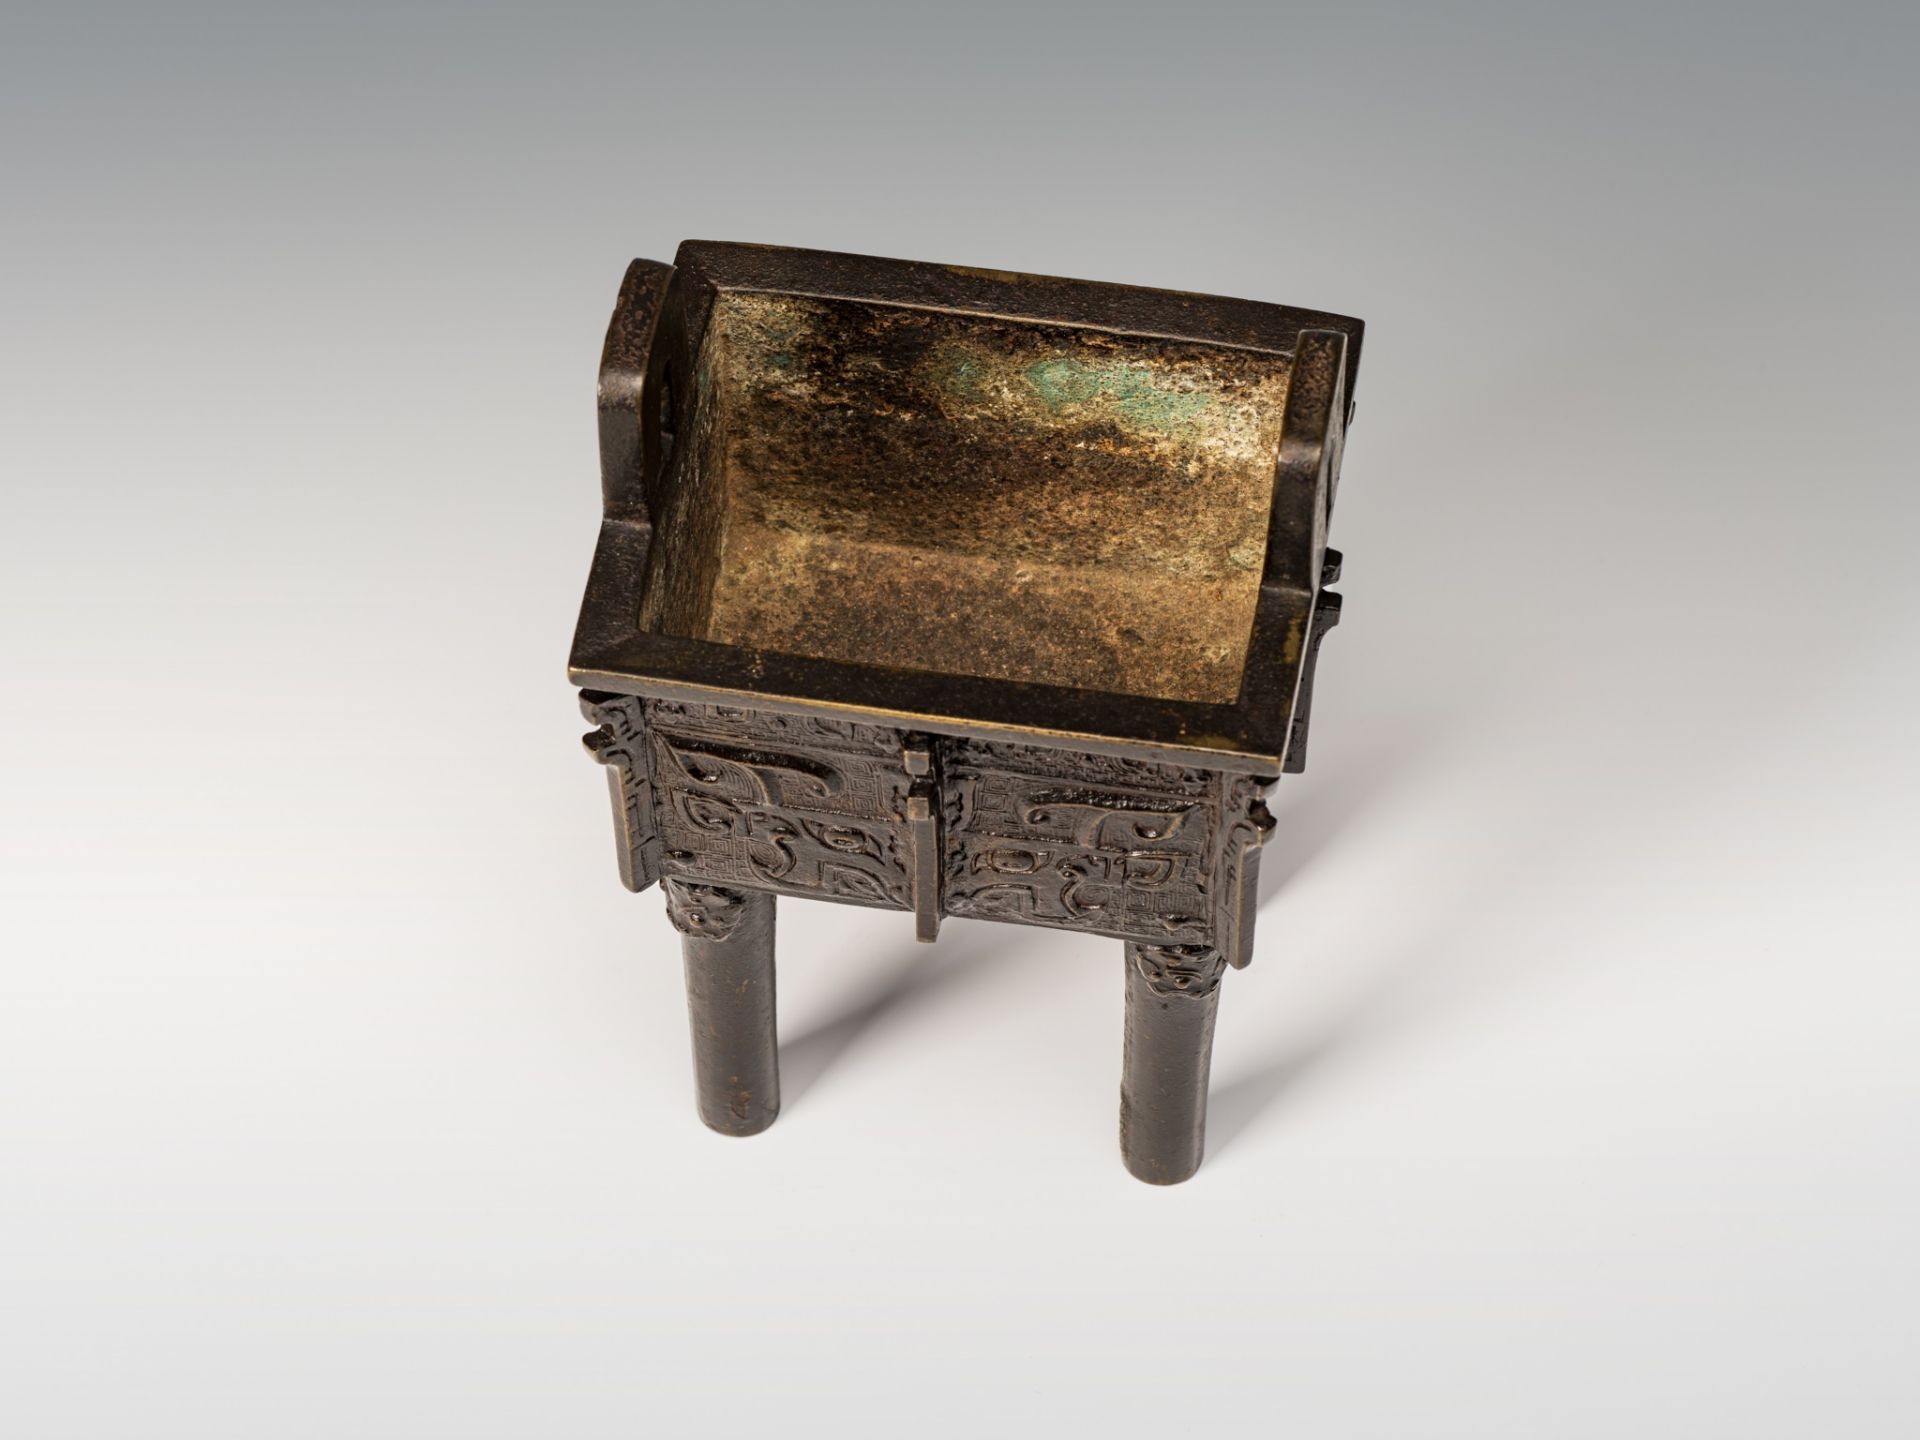 AN ARCHAISTIC BRONZE VESSEL, FANGDING, CHINA, 17TH CENTURY - Image 11 of 13